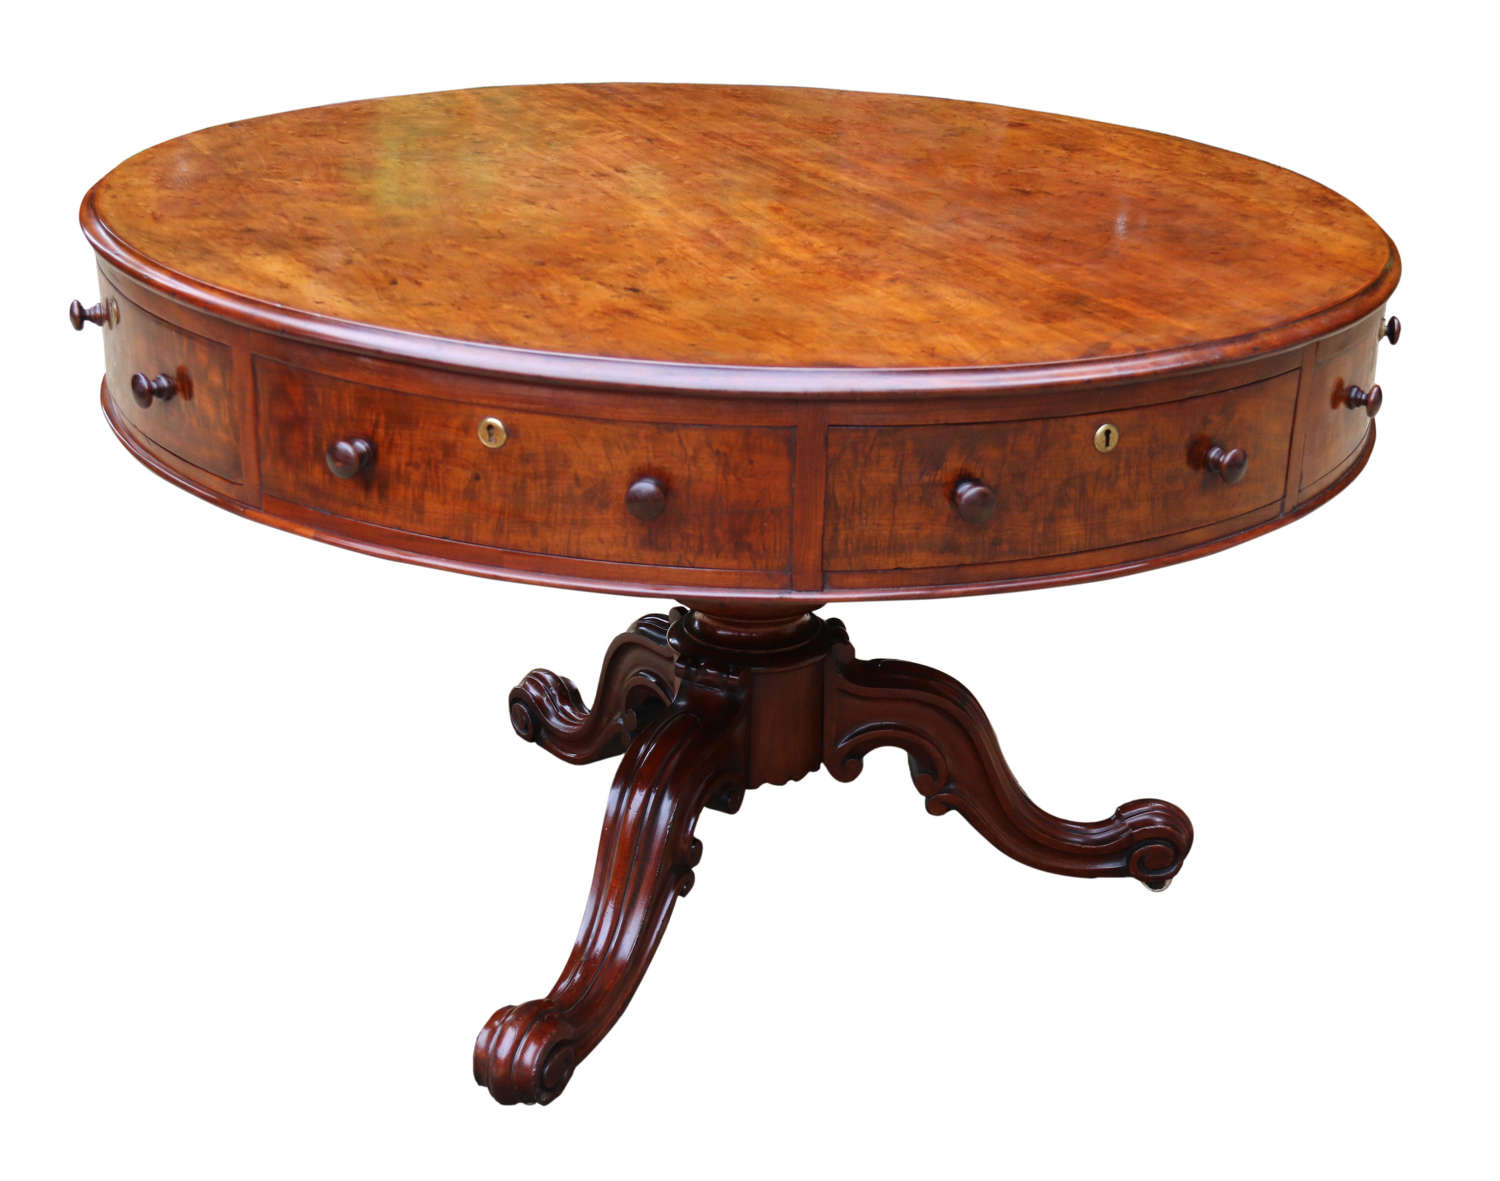 Library Drum Table made from figured mahogany 19th century English